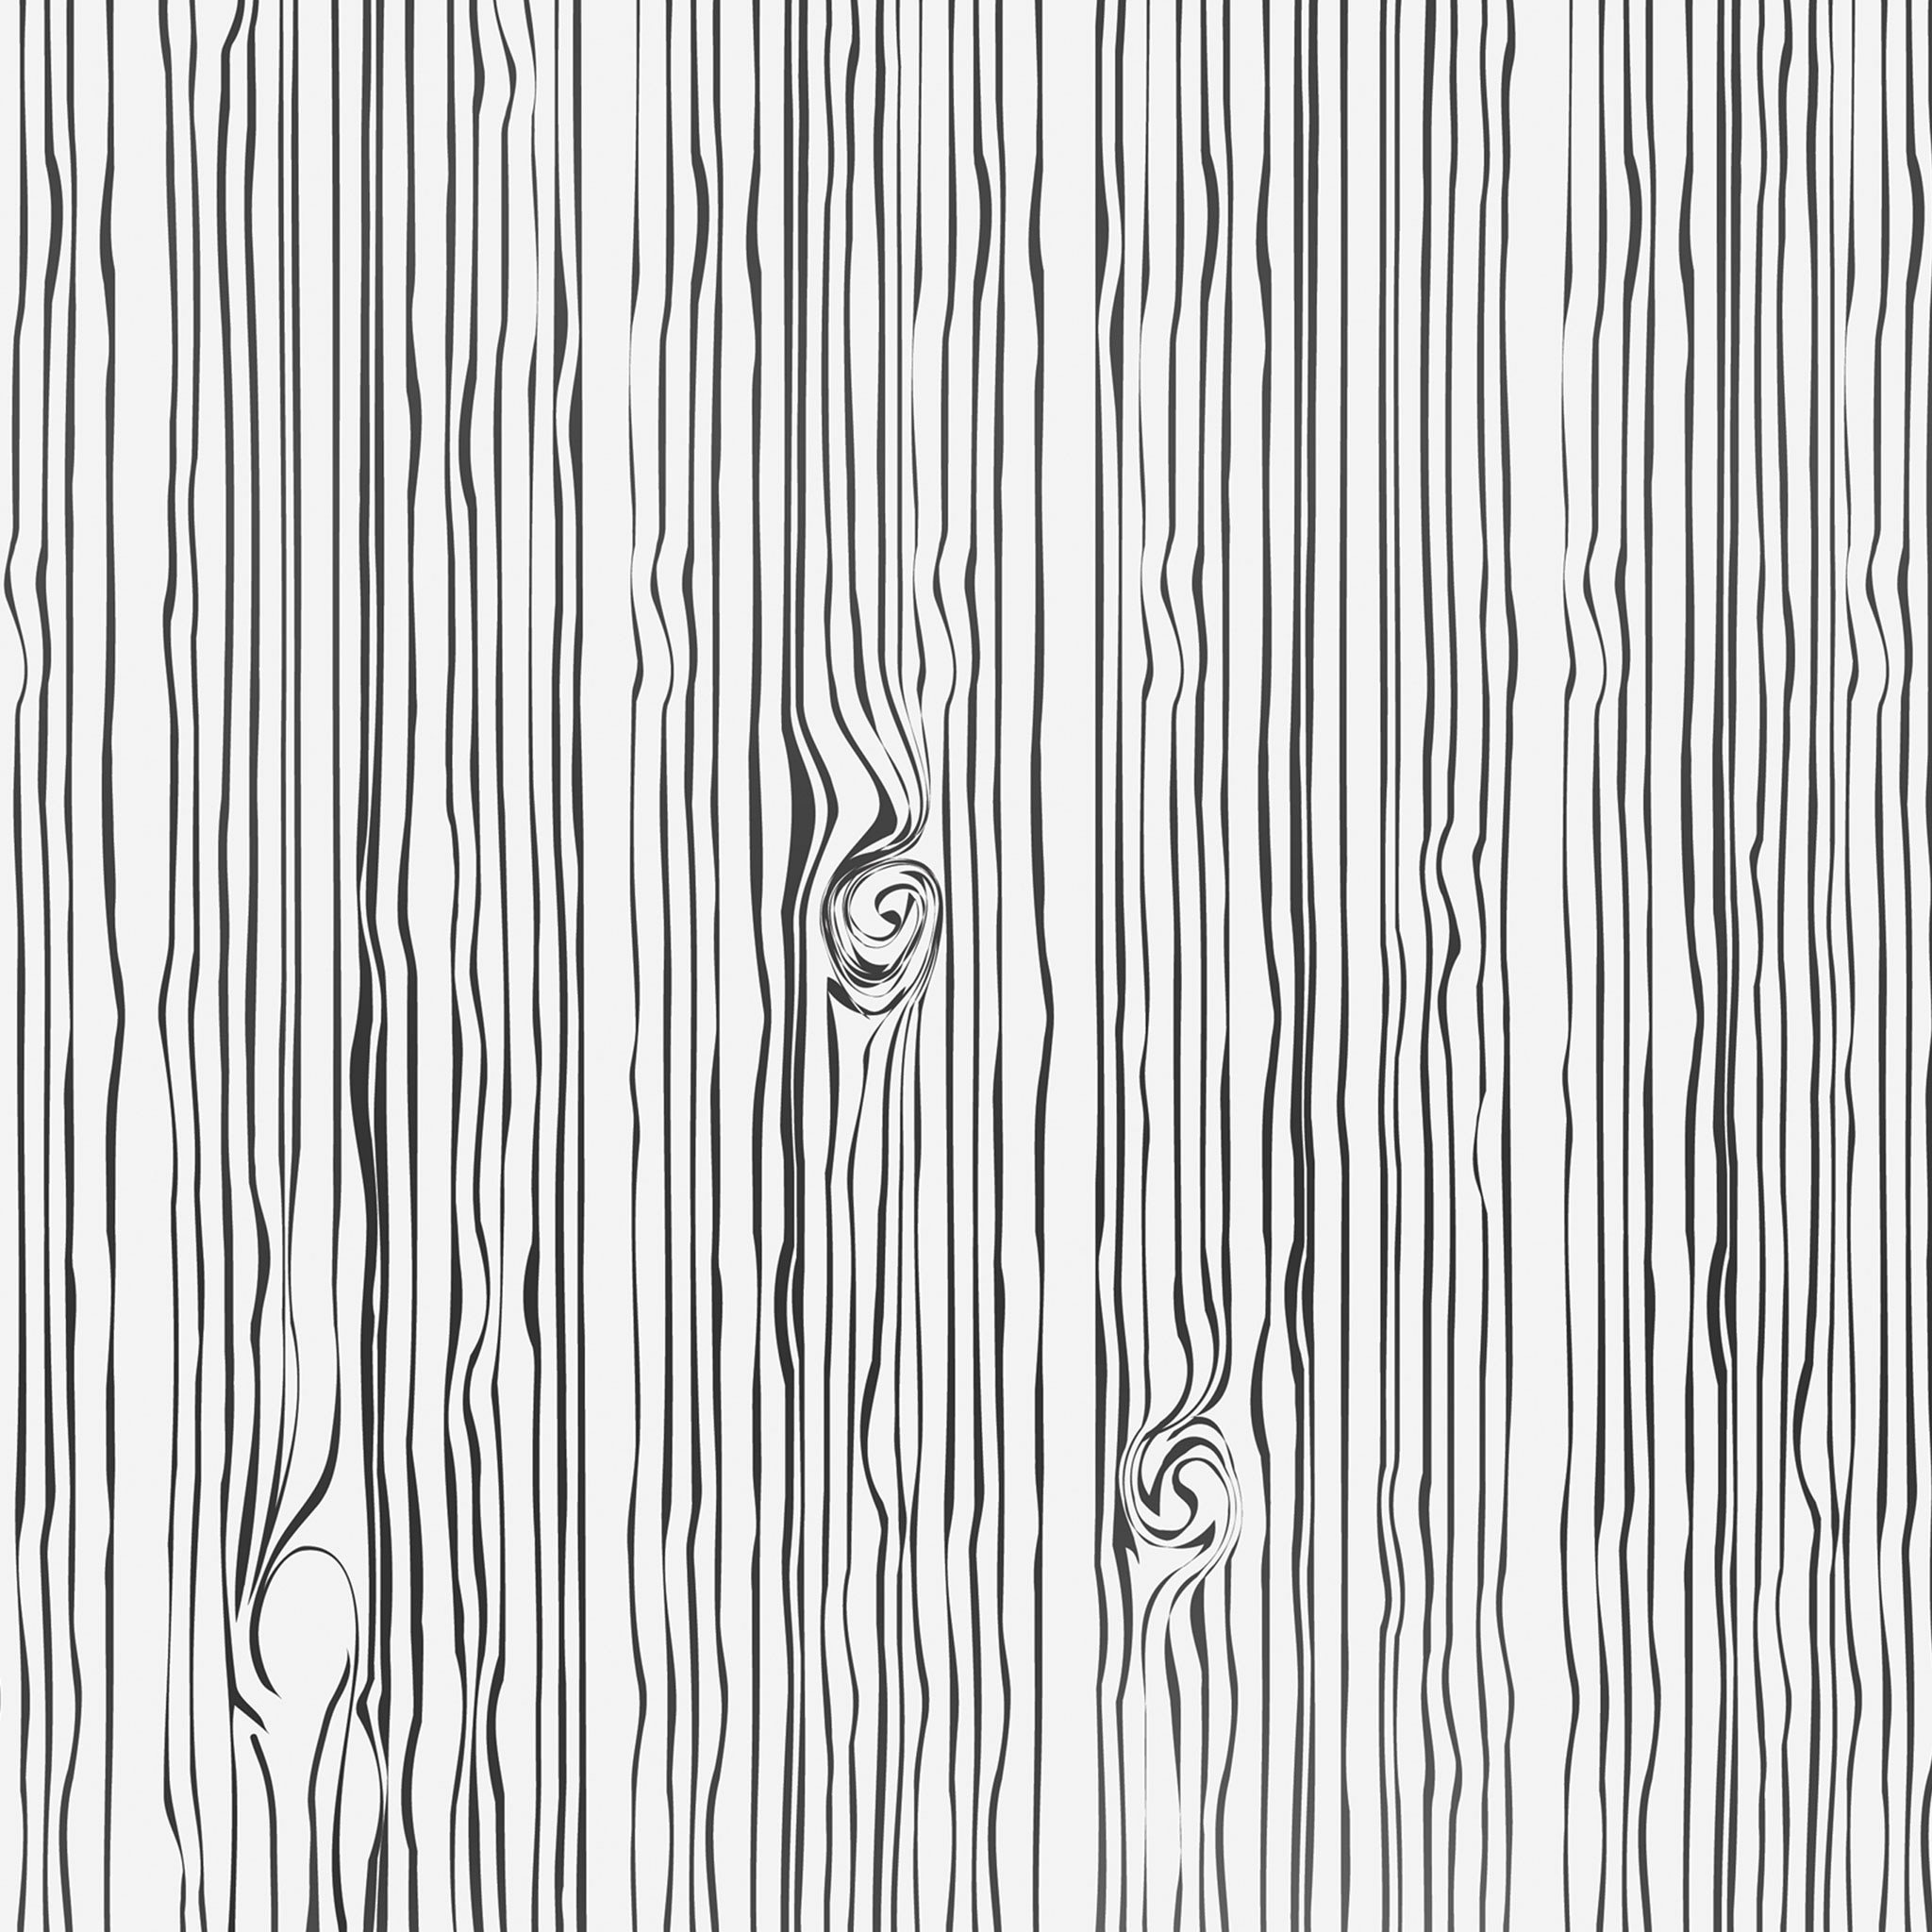 Wood Grain Vector Black And White At Collection Of